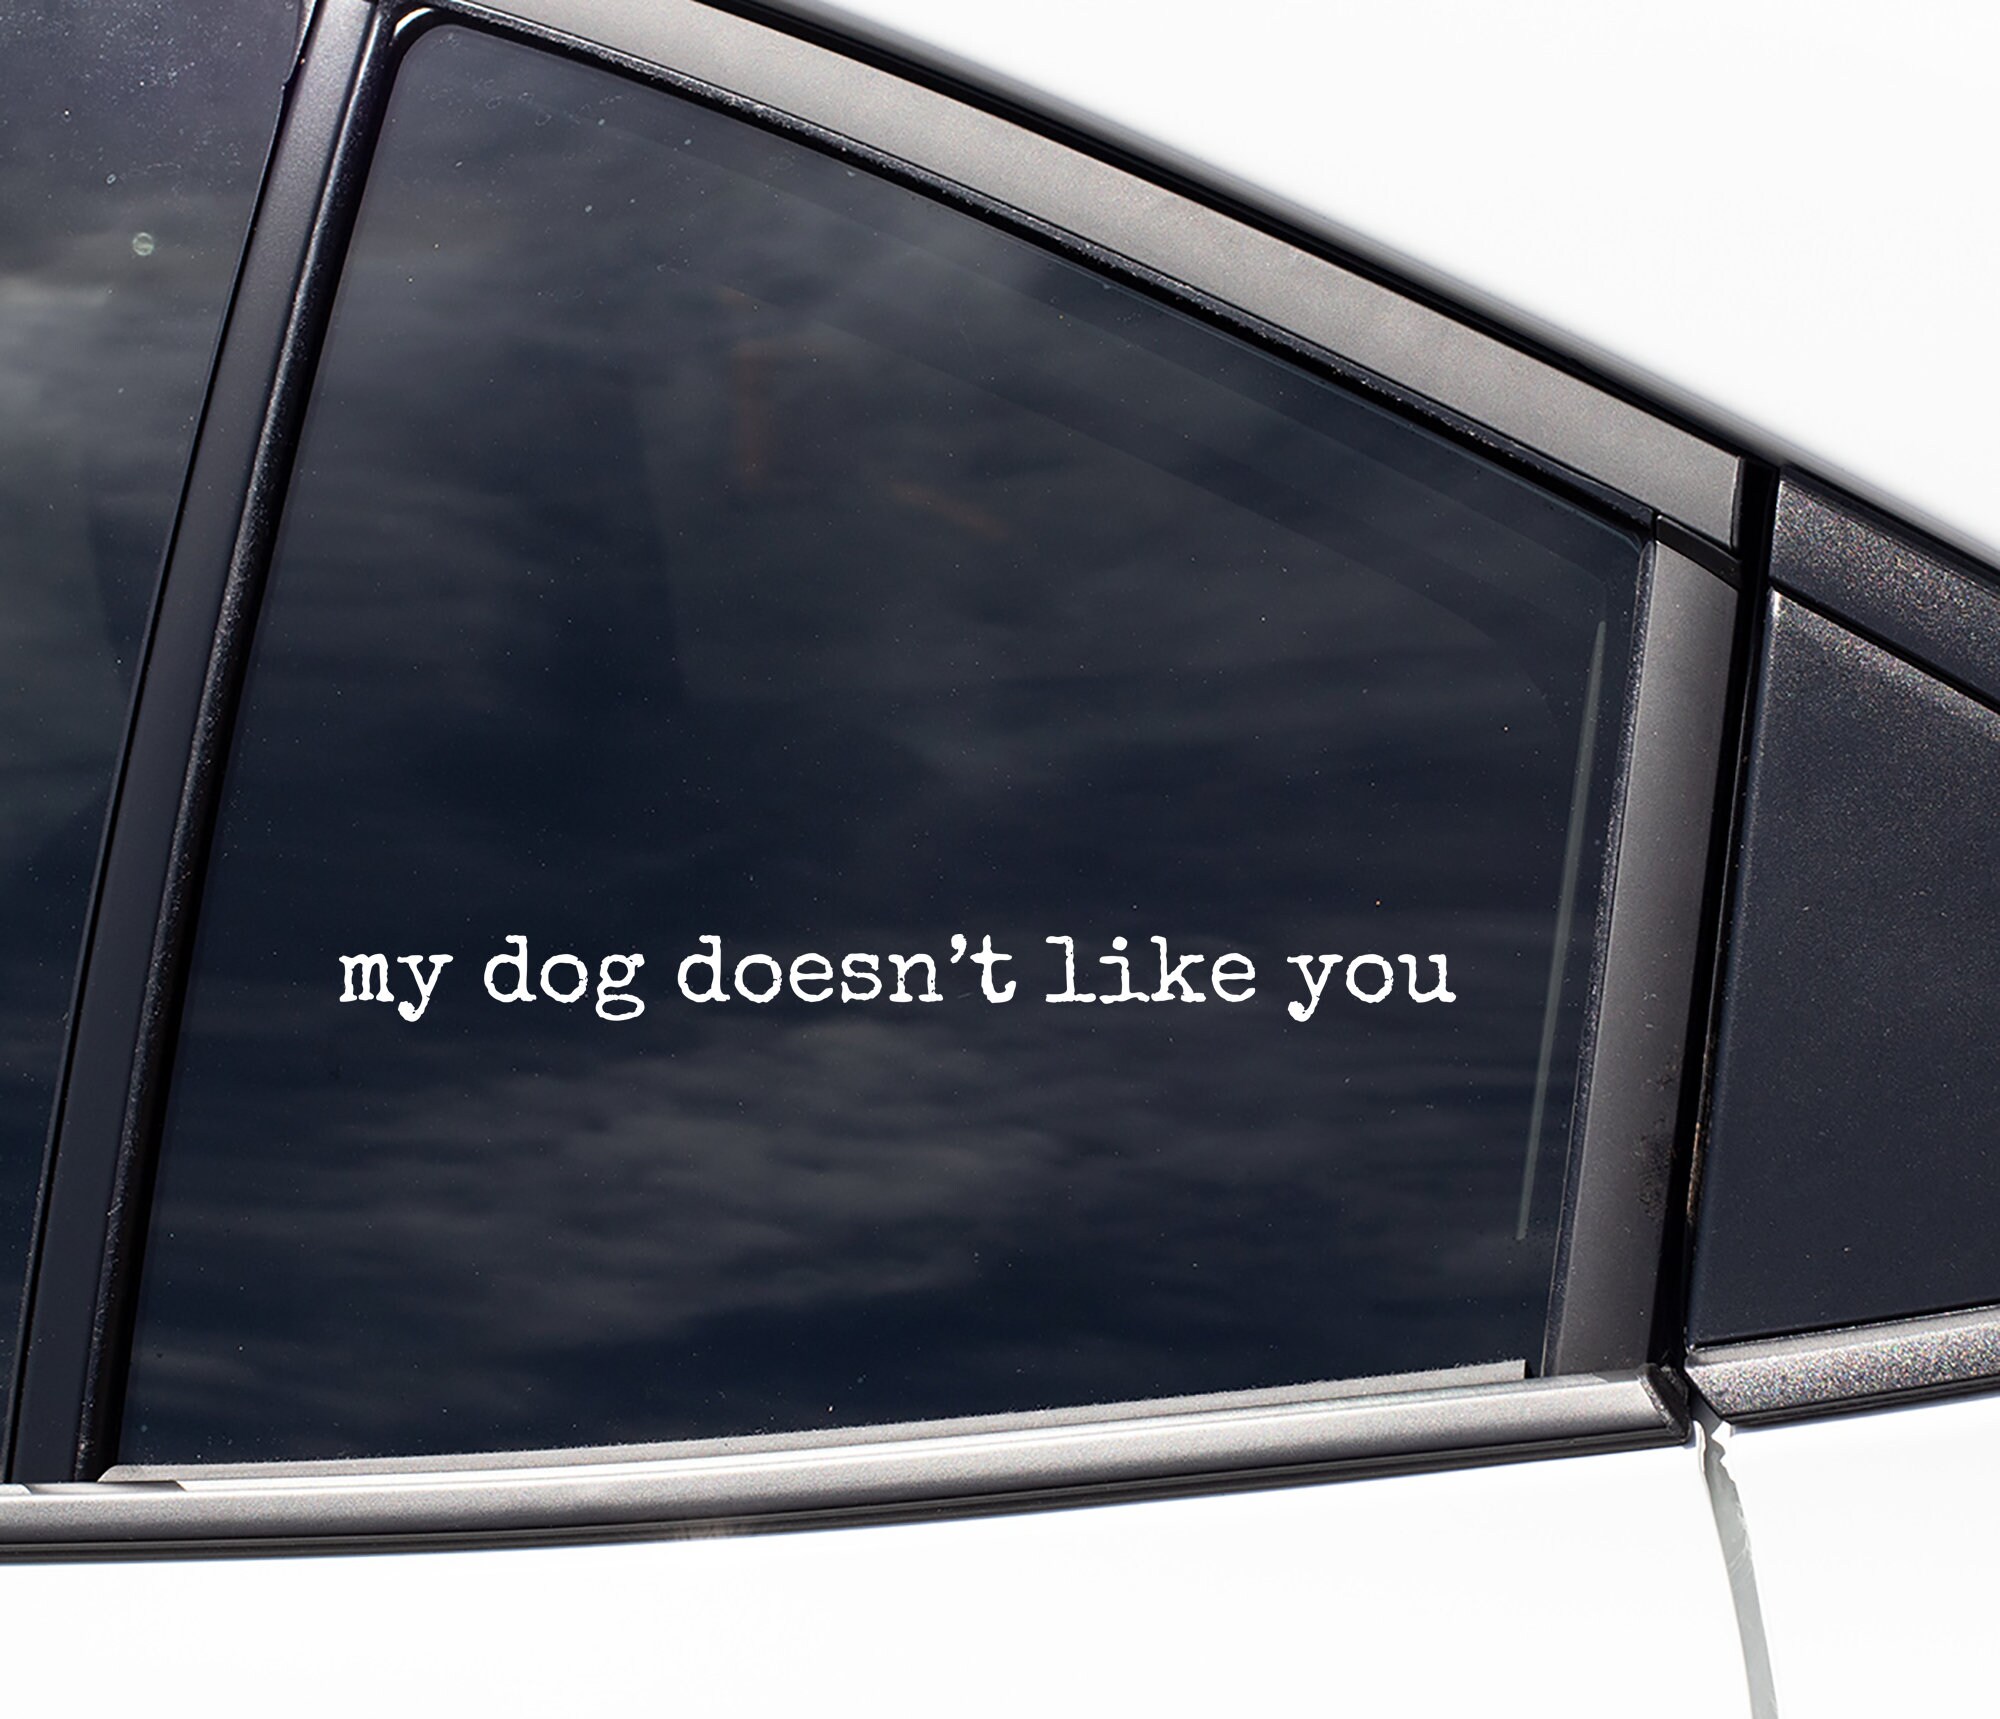 If My Dog Doesn't Like You, Neither Do I - Waterproof Car, Window, Laptop, Water  bottle Decals Stickers